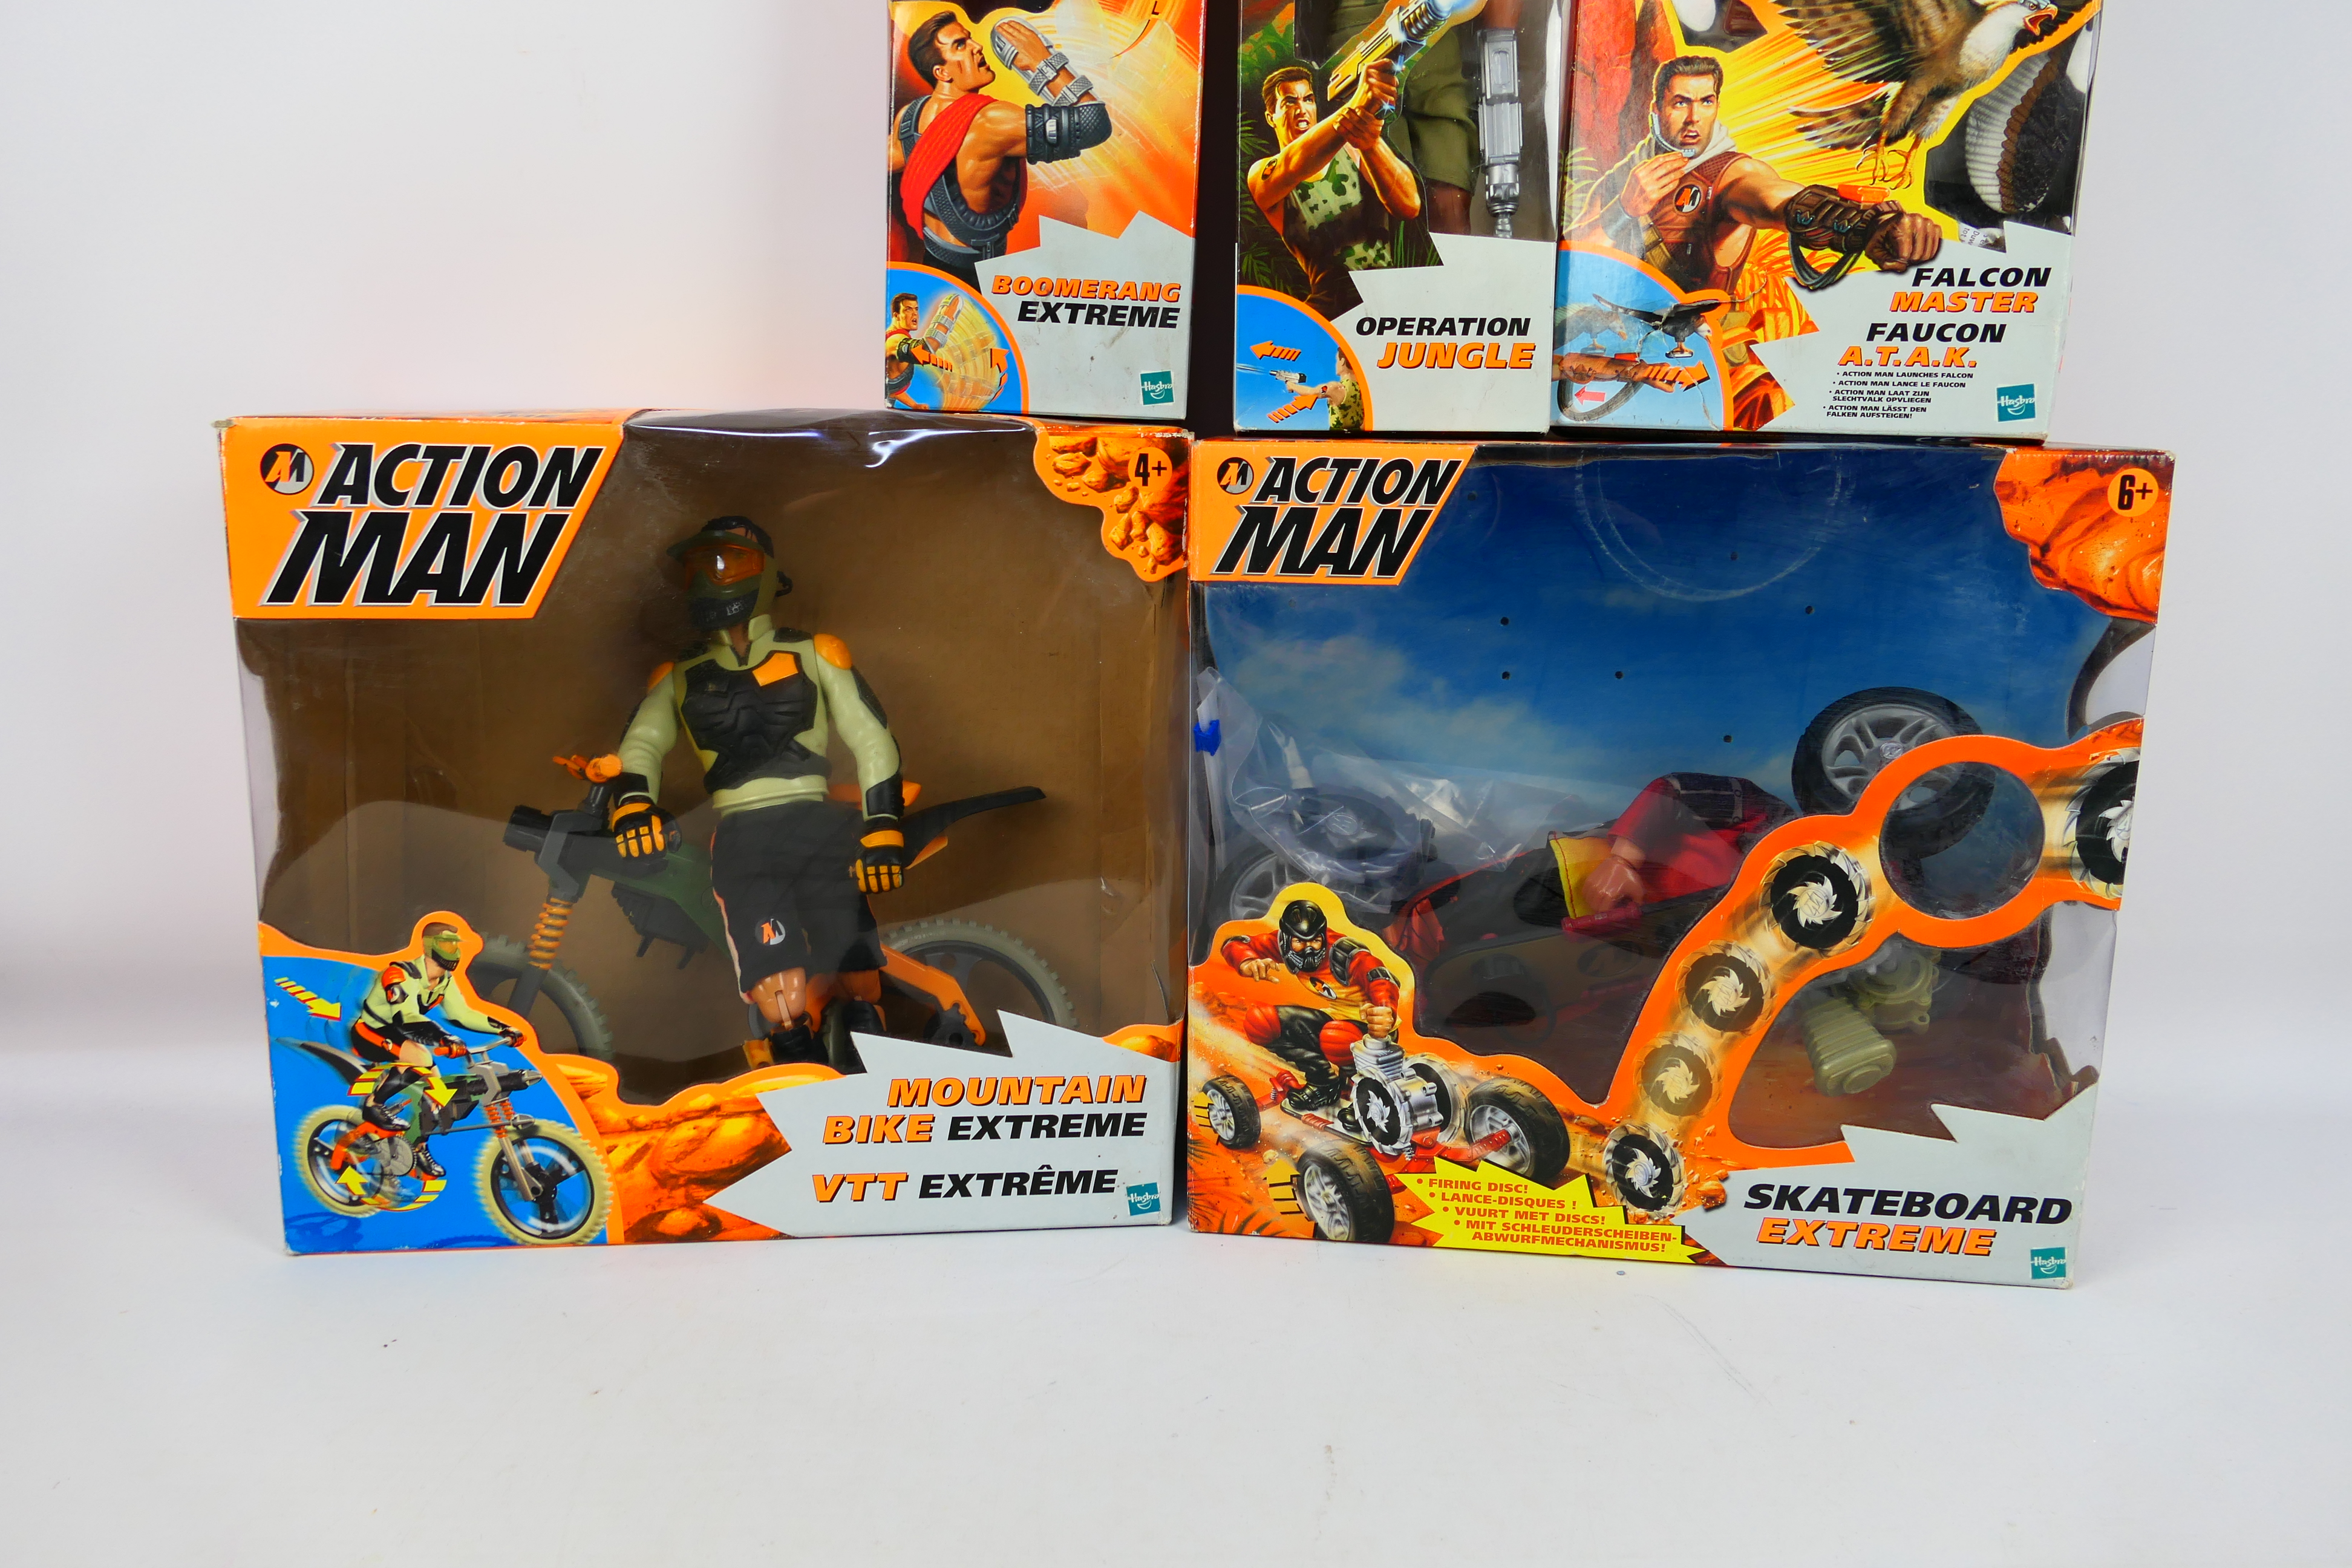 Hasbro - Action Man - 5 x boxed Action Man figures, Operation Jungle # 89508, - Image 3 of 3